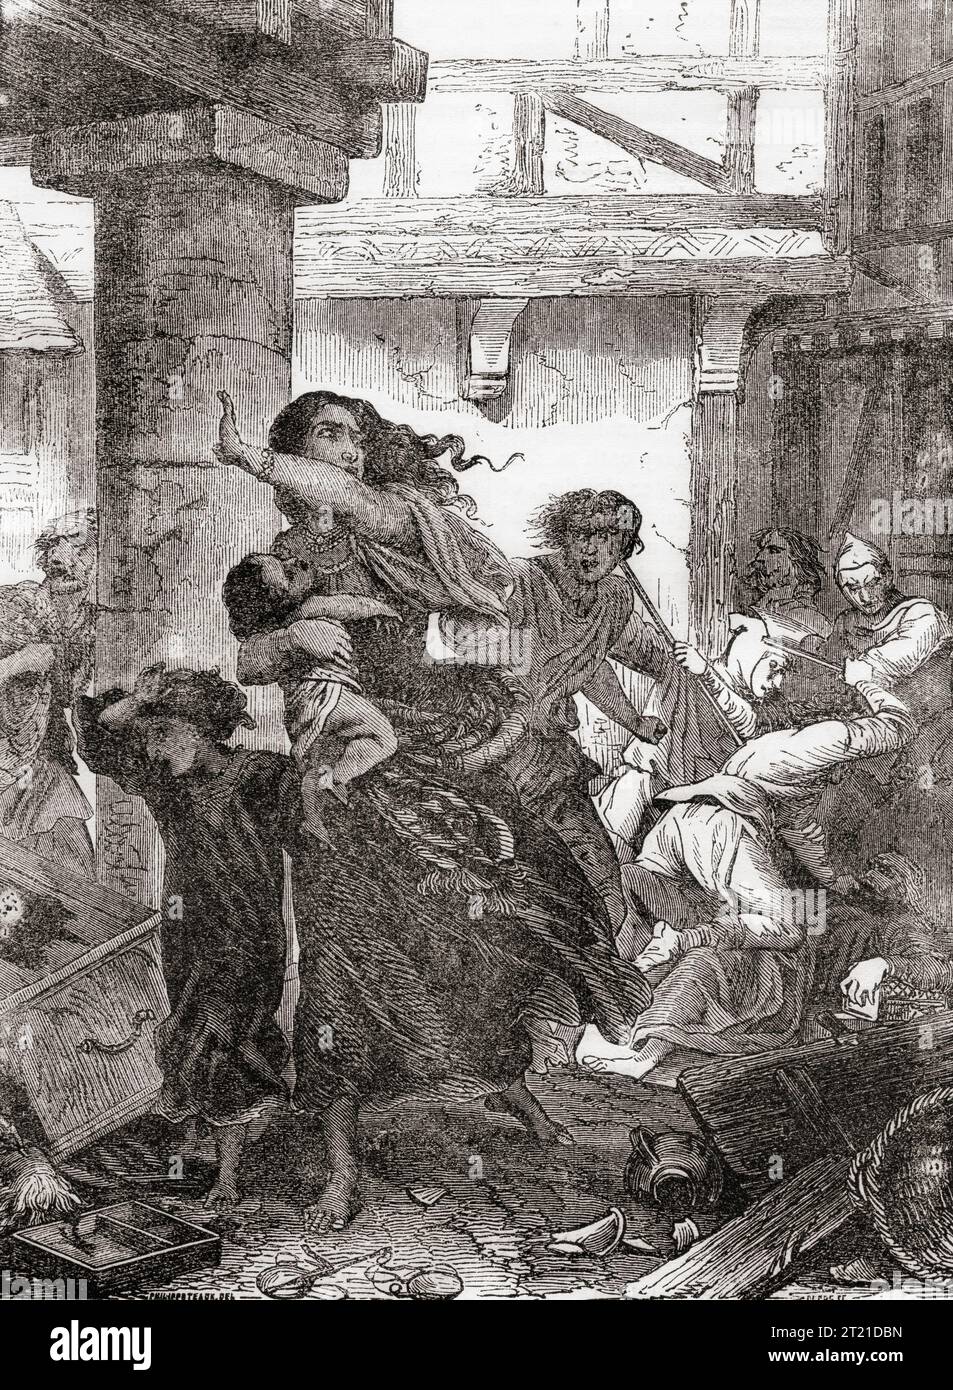 Anti-Semitic riots broke out at the coronation of Richard I in 1189 in London. Angry mobs murdered some 30 Jews as a false rumour spread that the new king had called for Jews to be killed. Afterward, Richard ordered that the Jews of England be protected.  From Cassell's Illustrated History of England, published 1857. Stock Photo